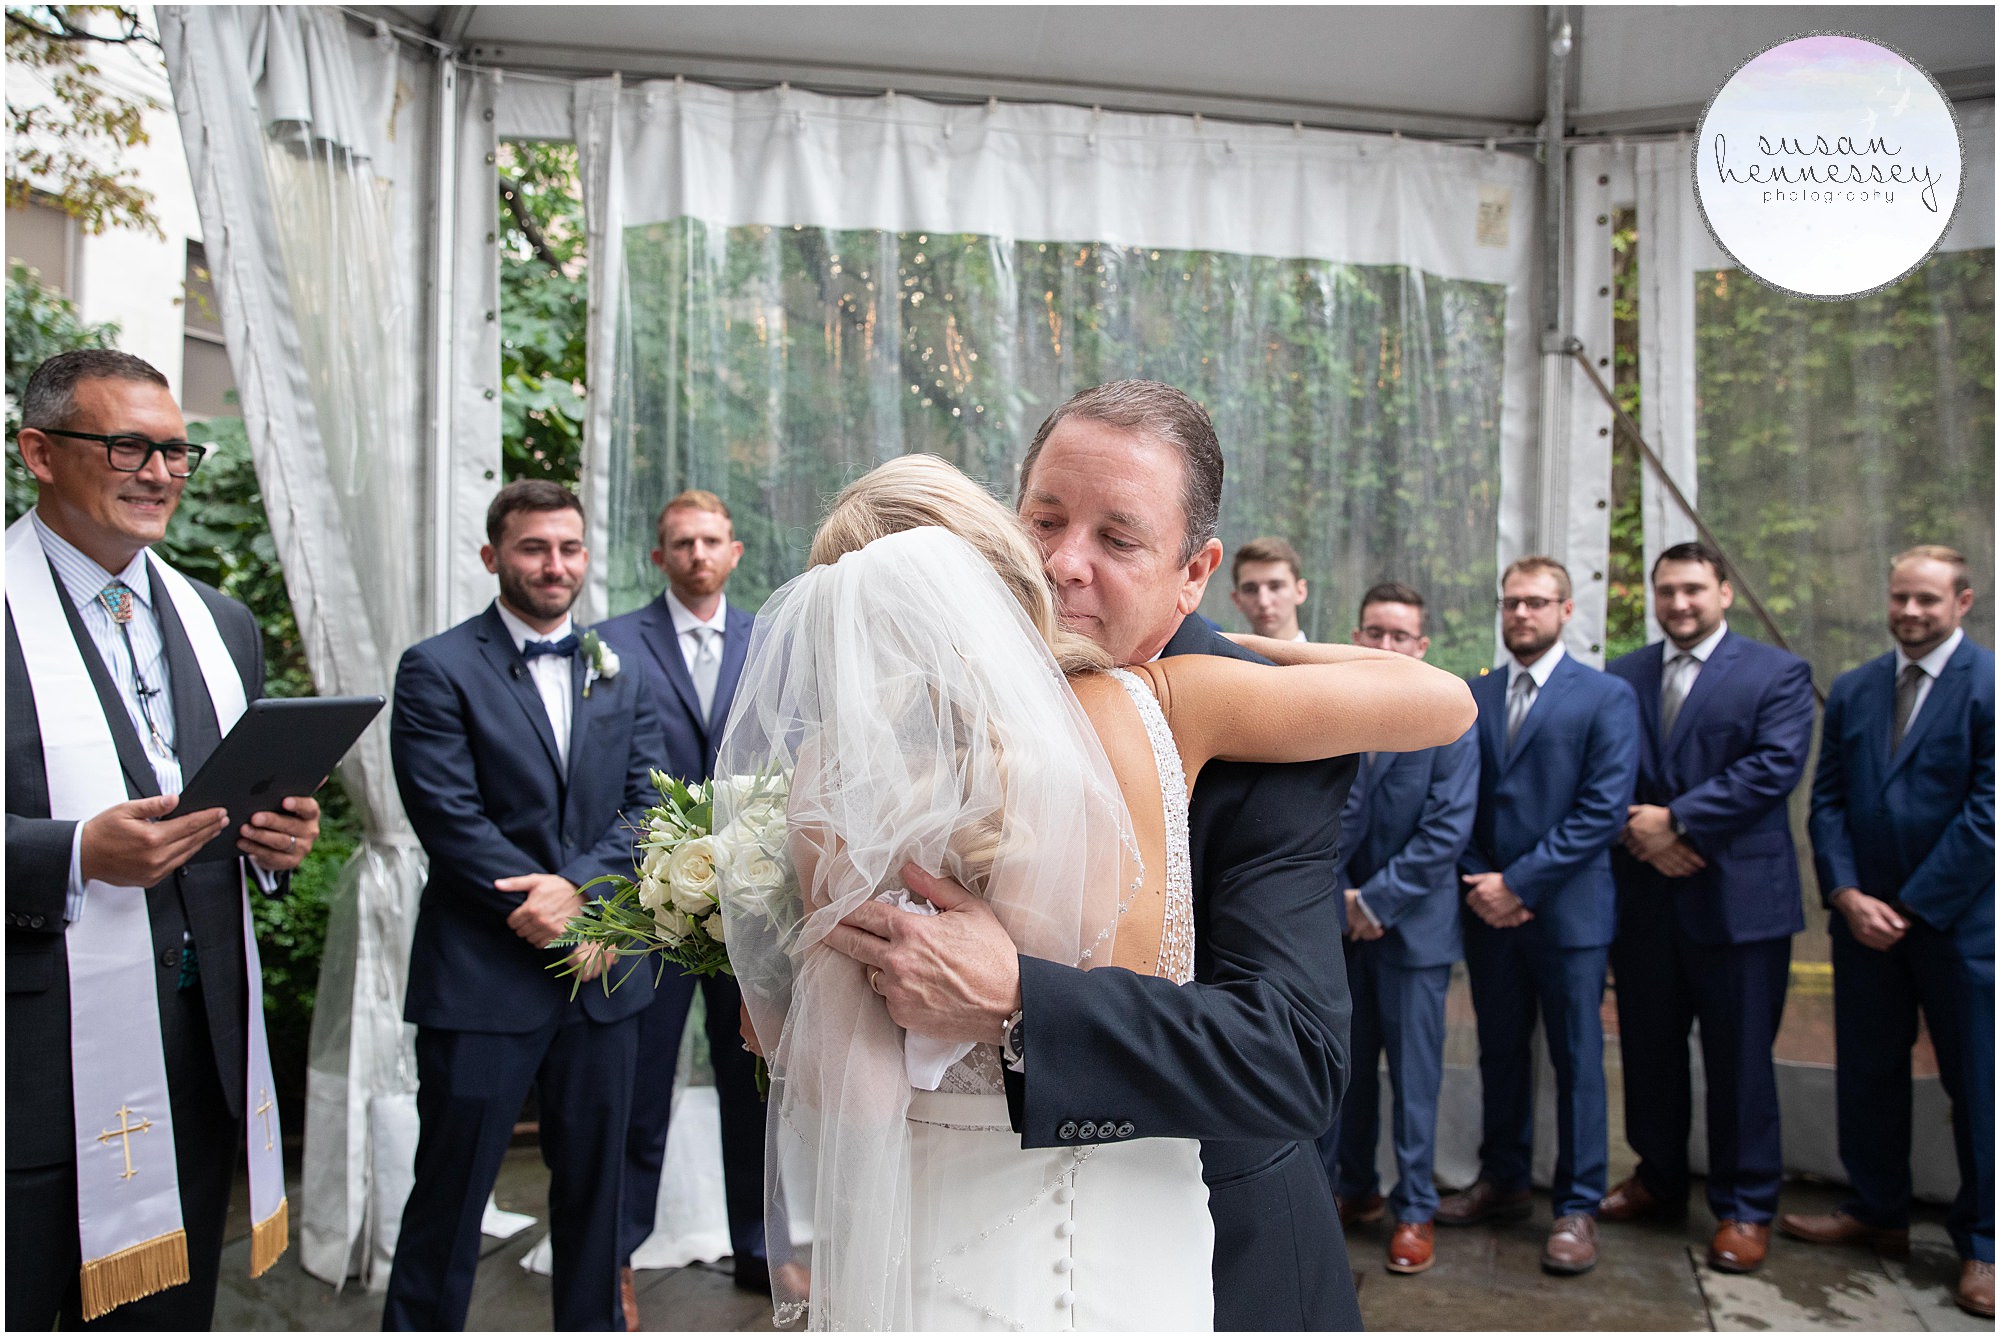 Father gives bride away at PA wedding